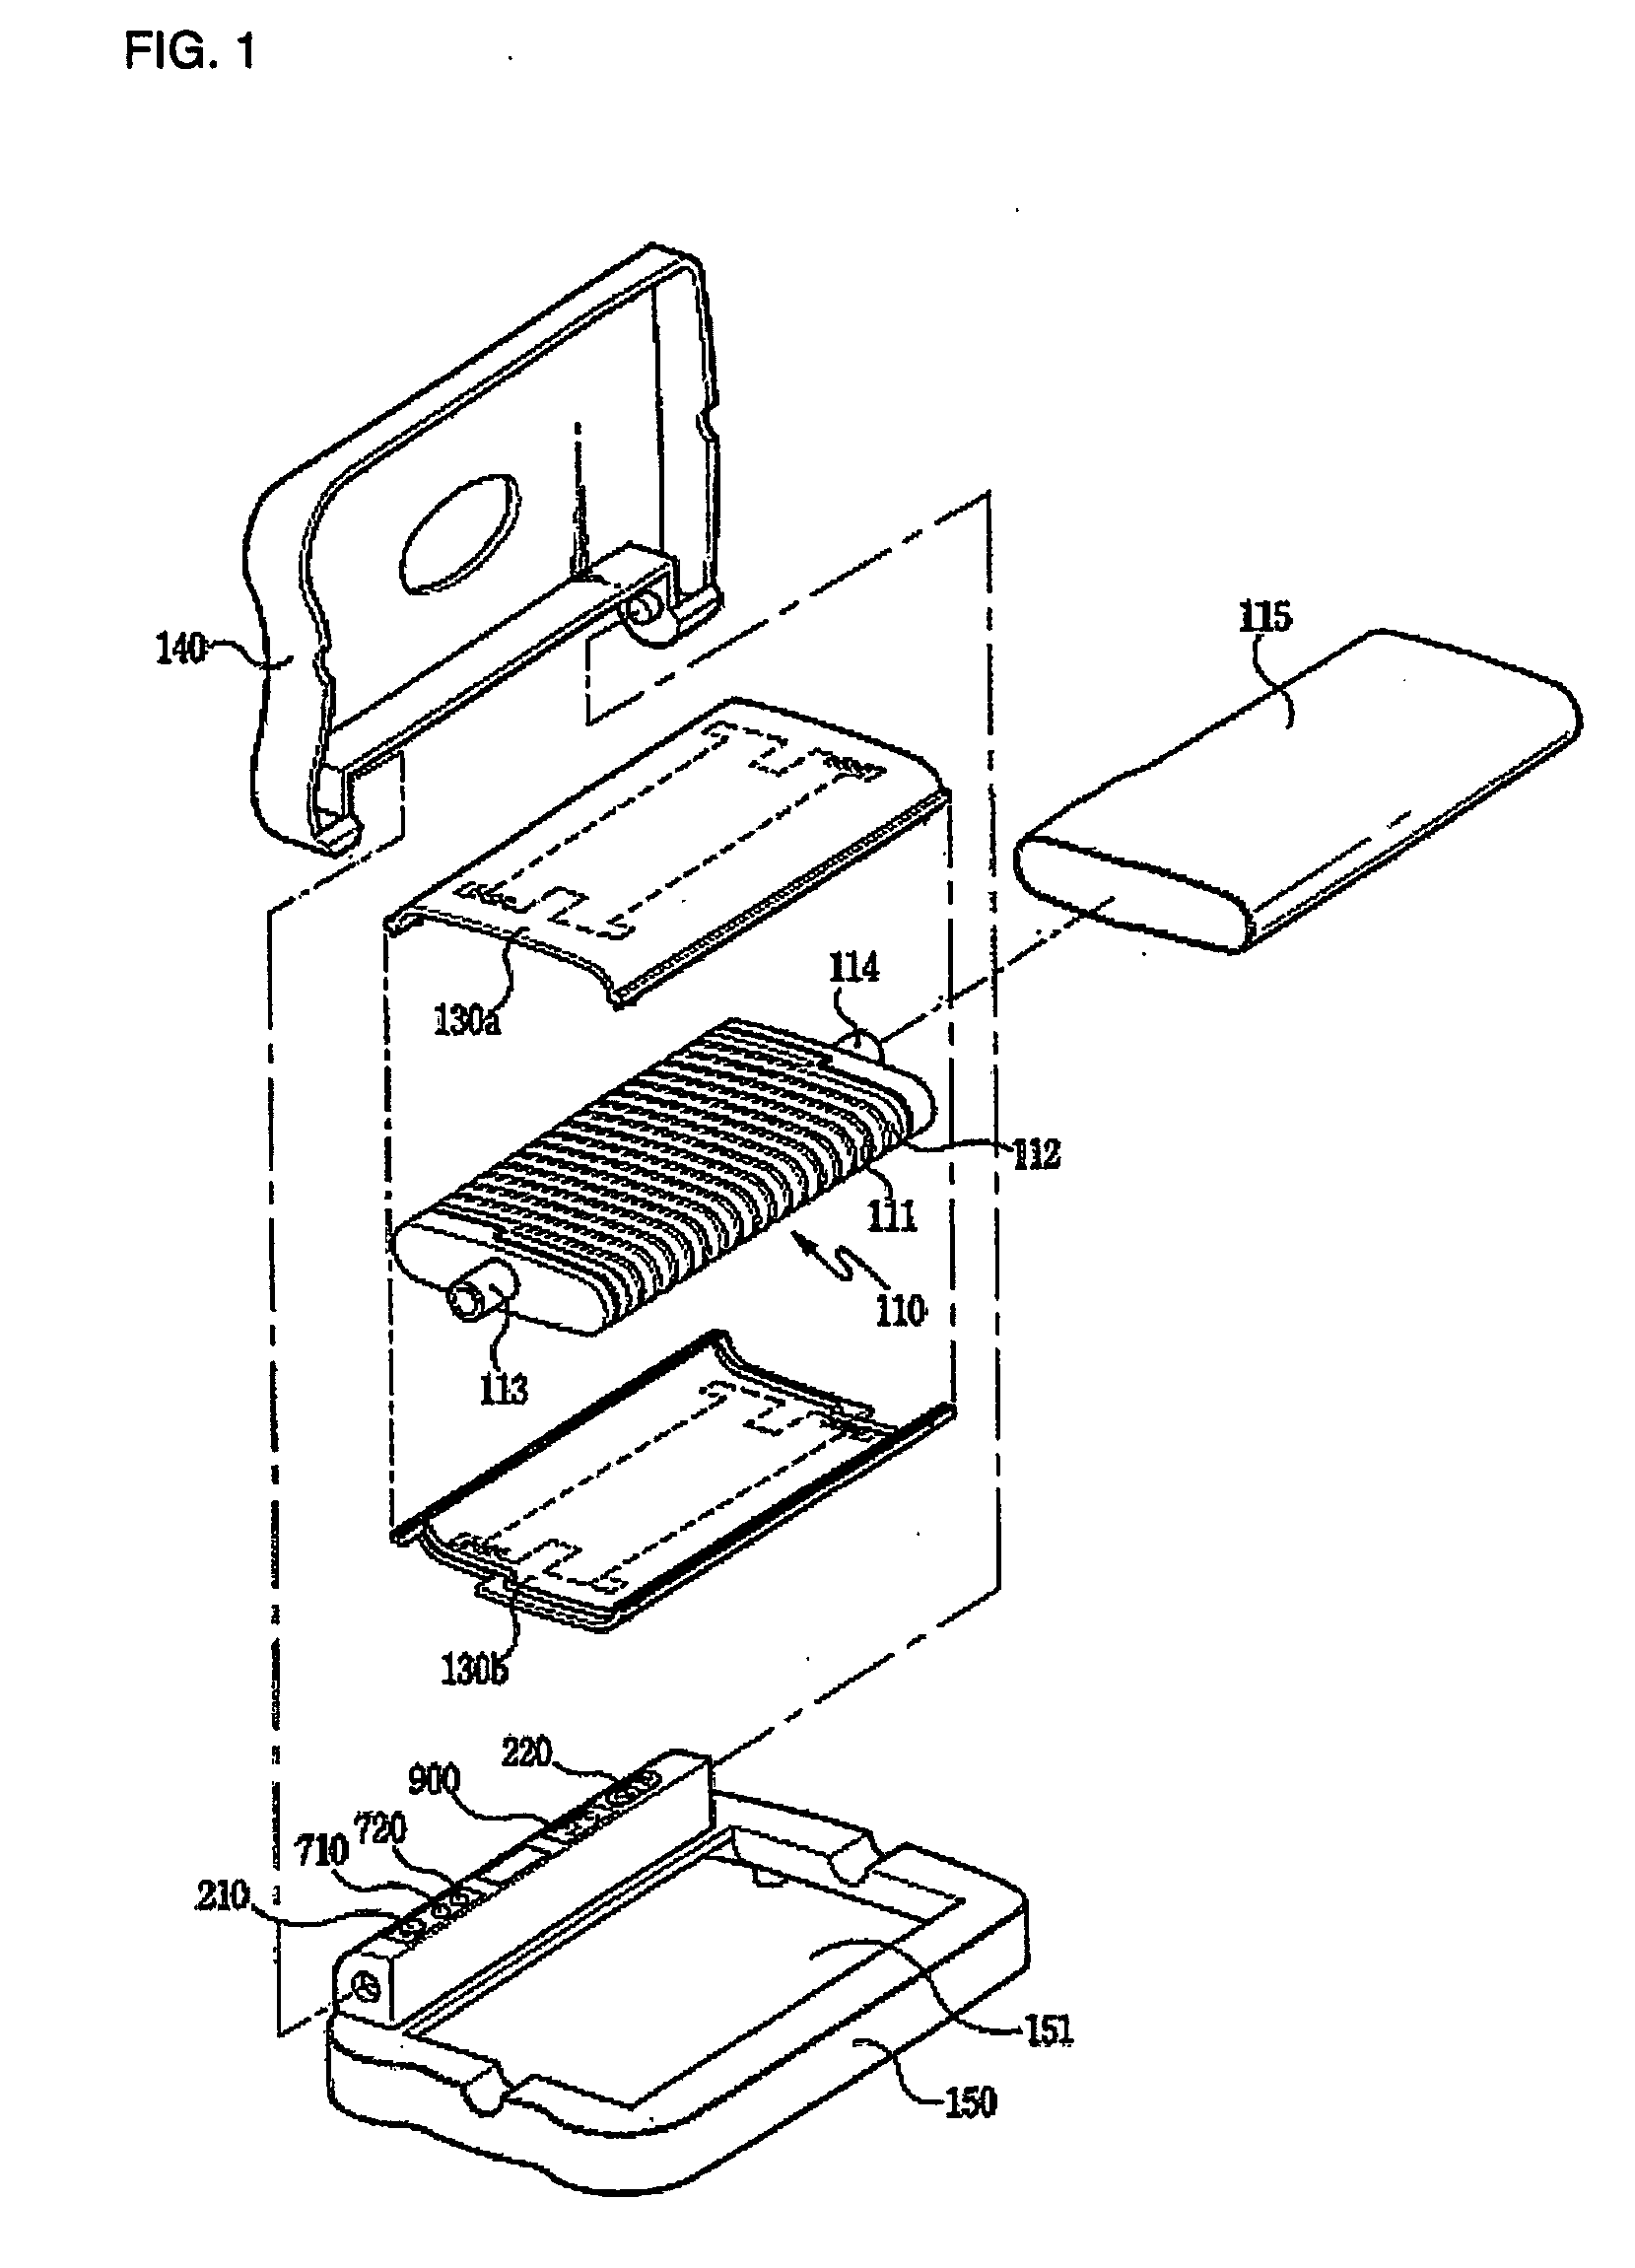 Warming apparatus with heater produced by pcb